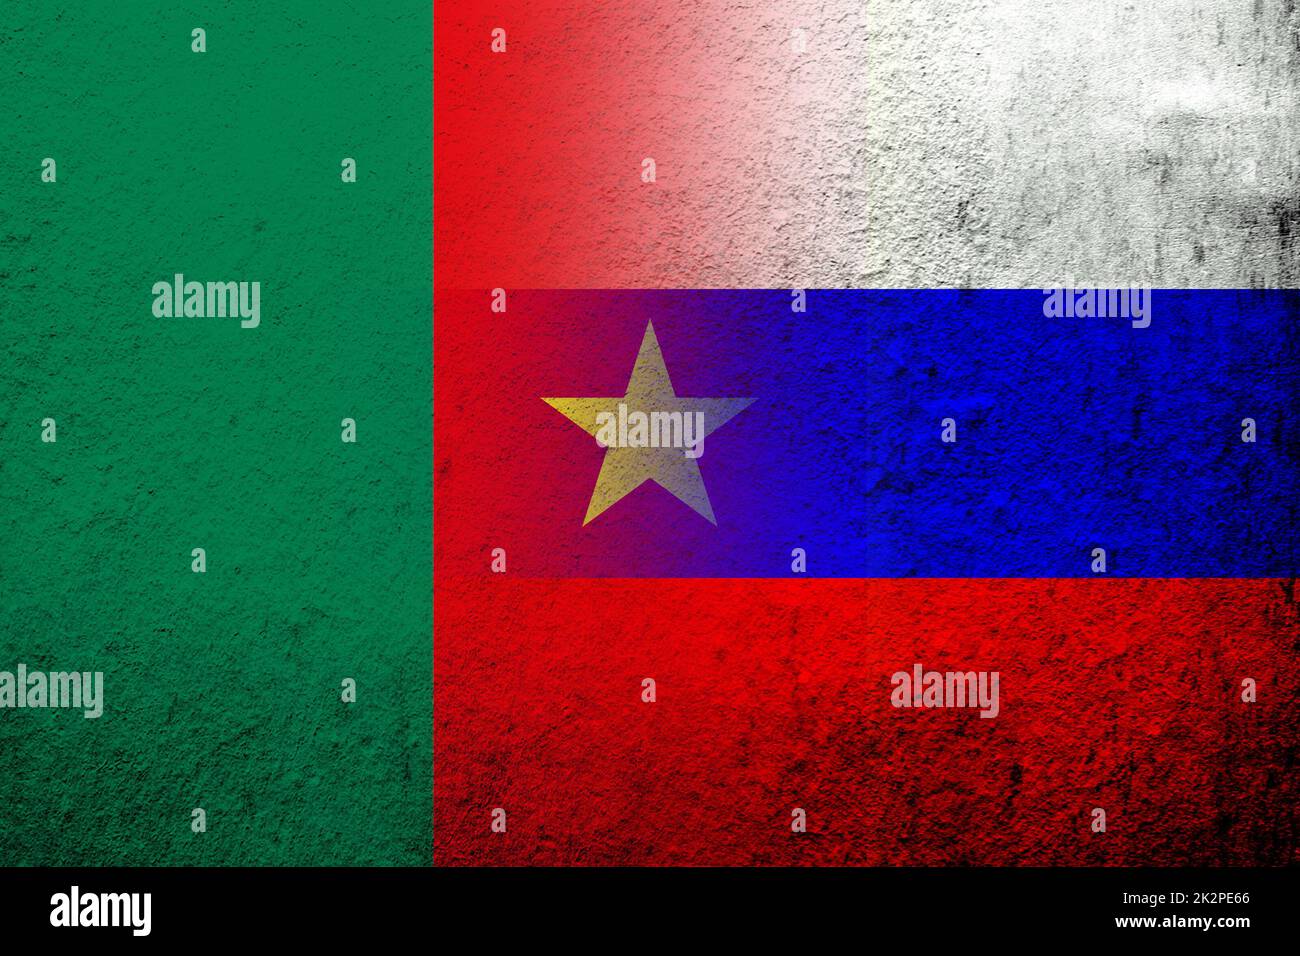 National flag of Russian Federation with The Republic of Cameroon National flag. Grunge background Stock Photo